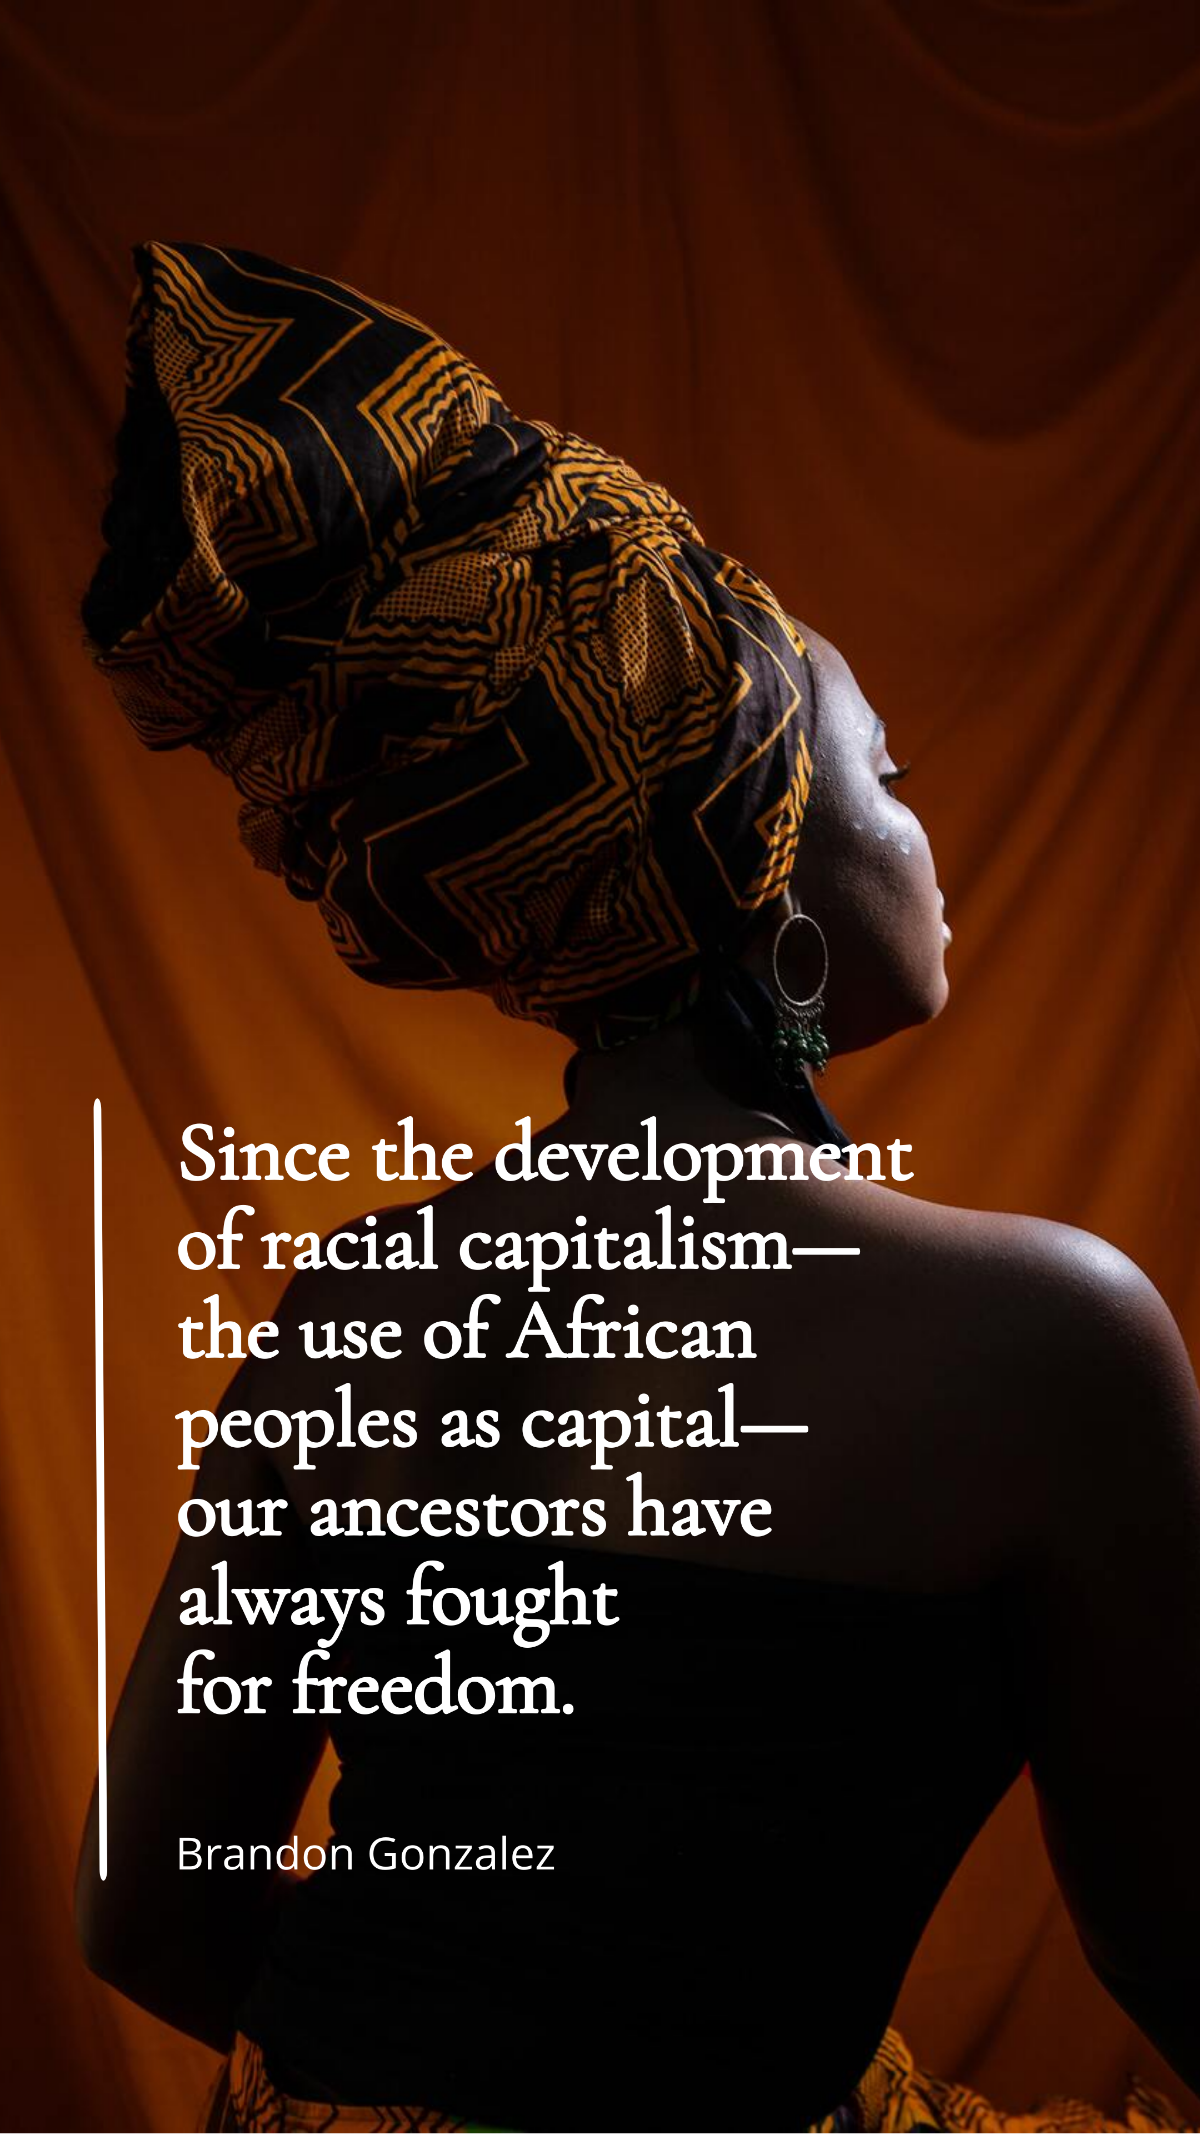 Brandon Gonzalez - Since the development of racial capitalism—the use of African peoples as capital—our ancestors have always fought for freedom.